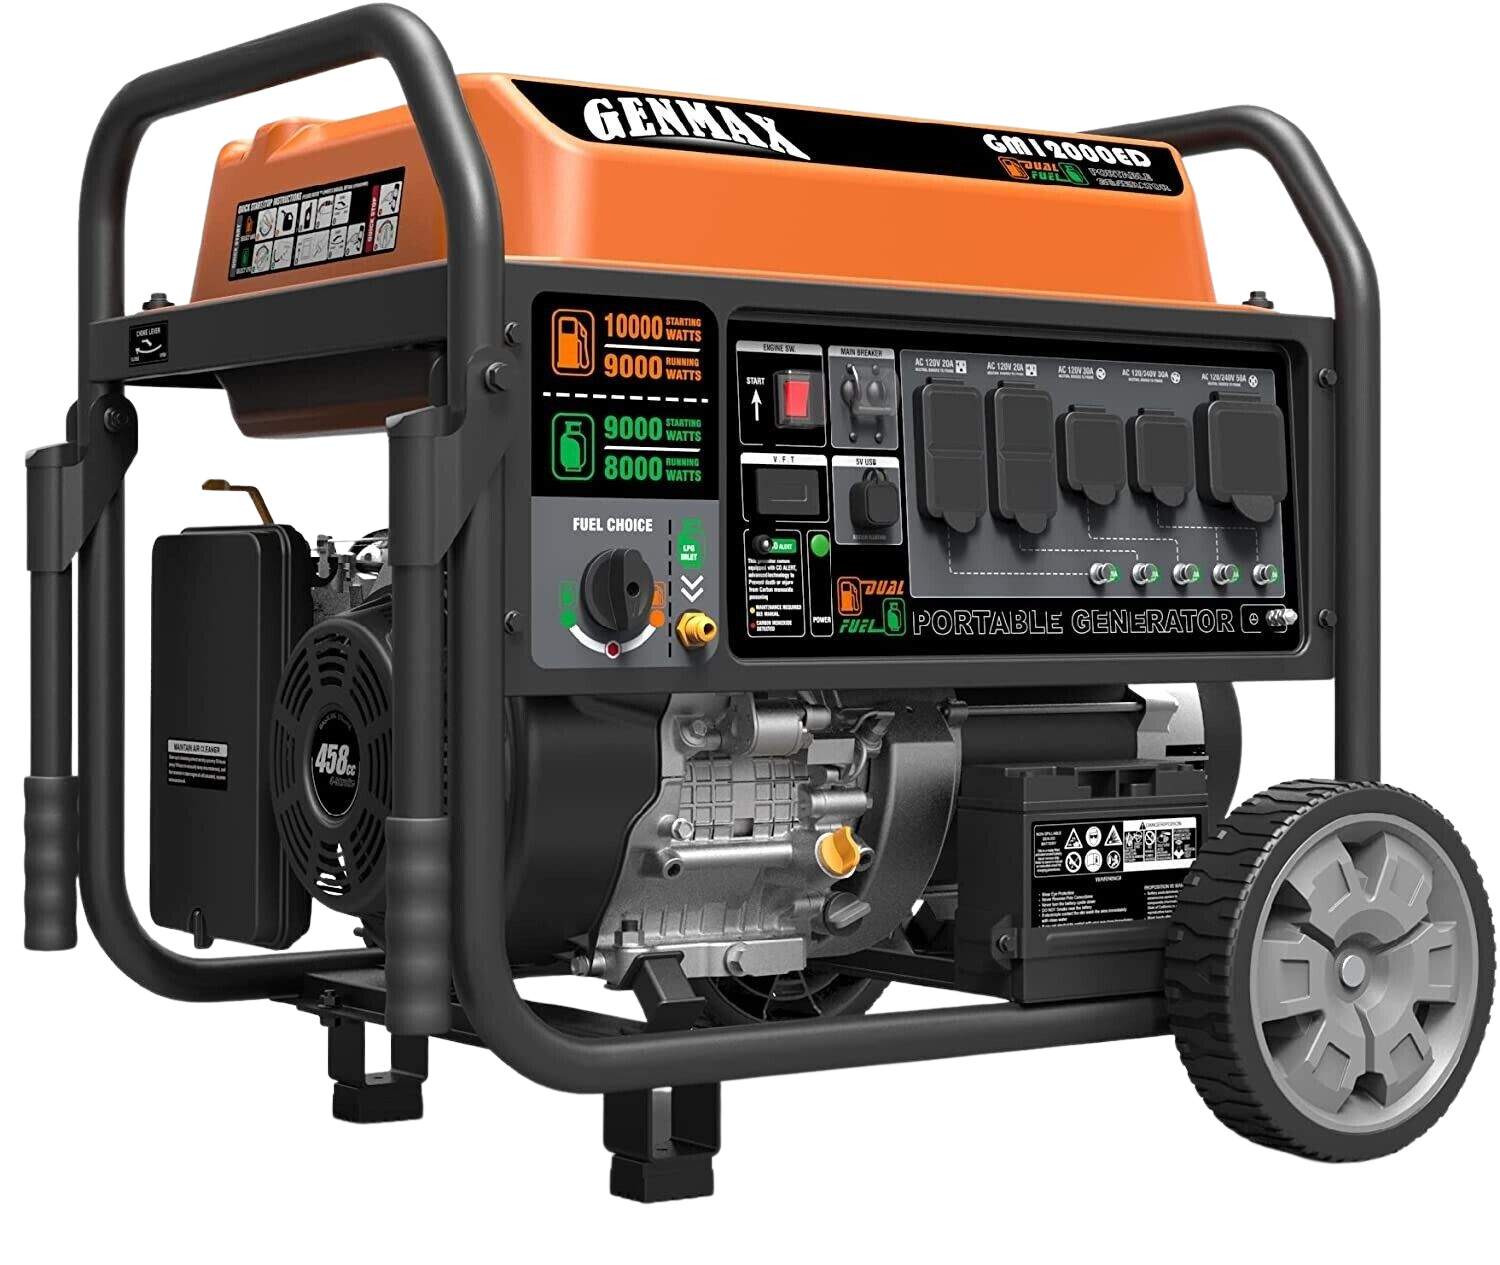 GENMAX, GENMAX GM12000ED Dual Fuel Generator 9000W/10000W 50 Amp Electric Start with CO Detect New